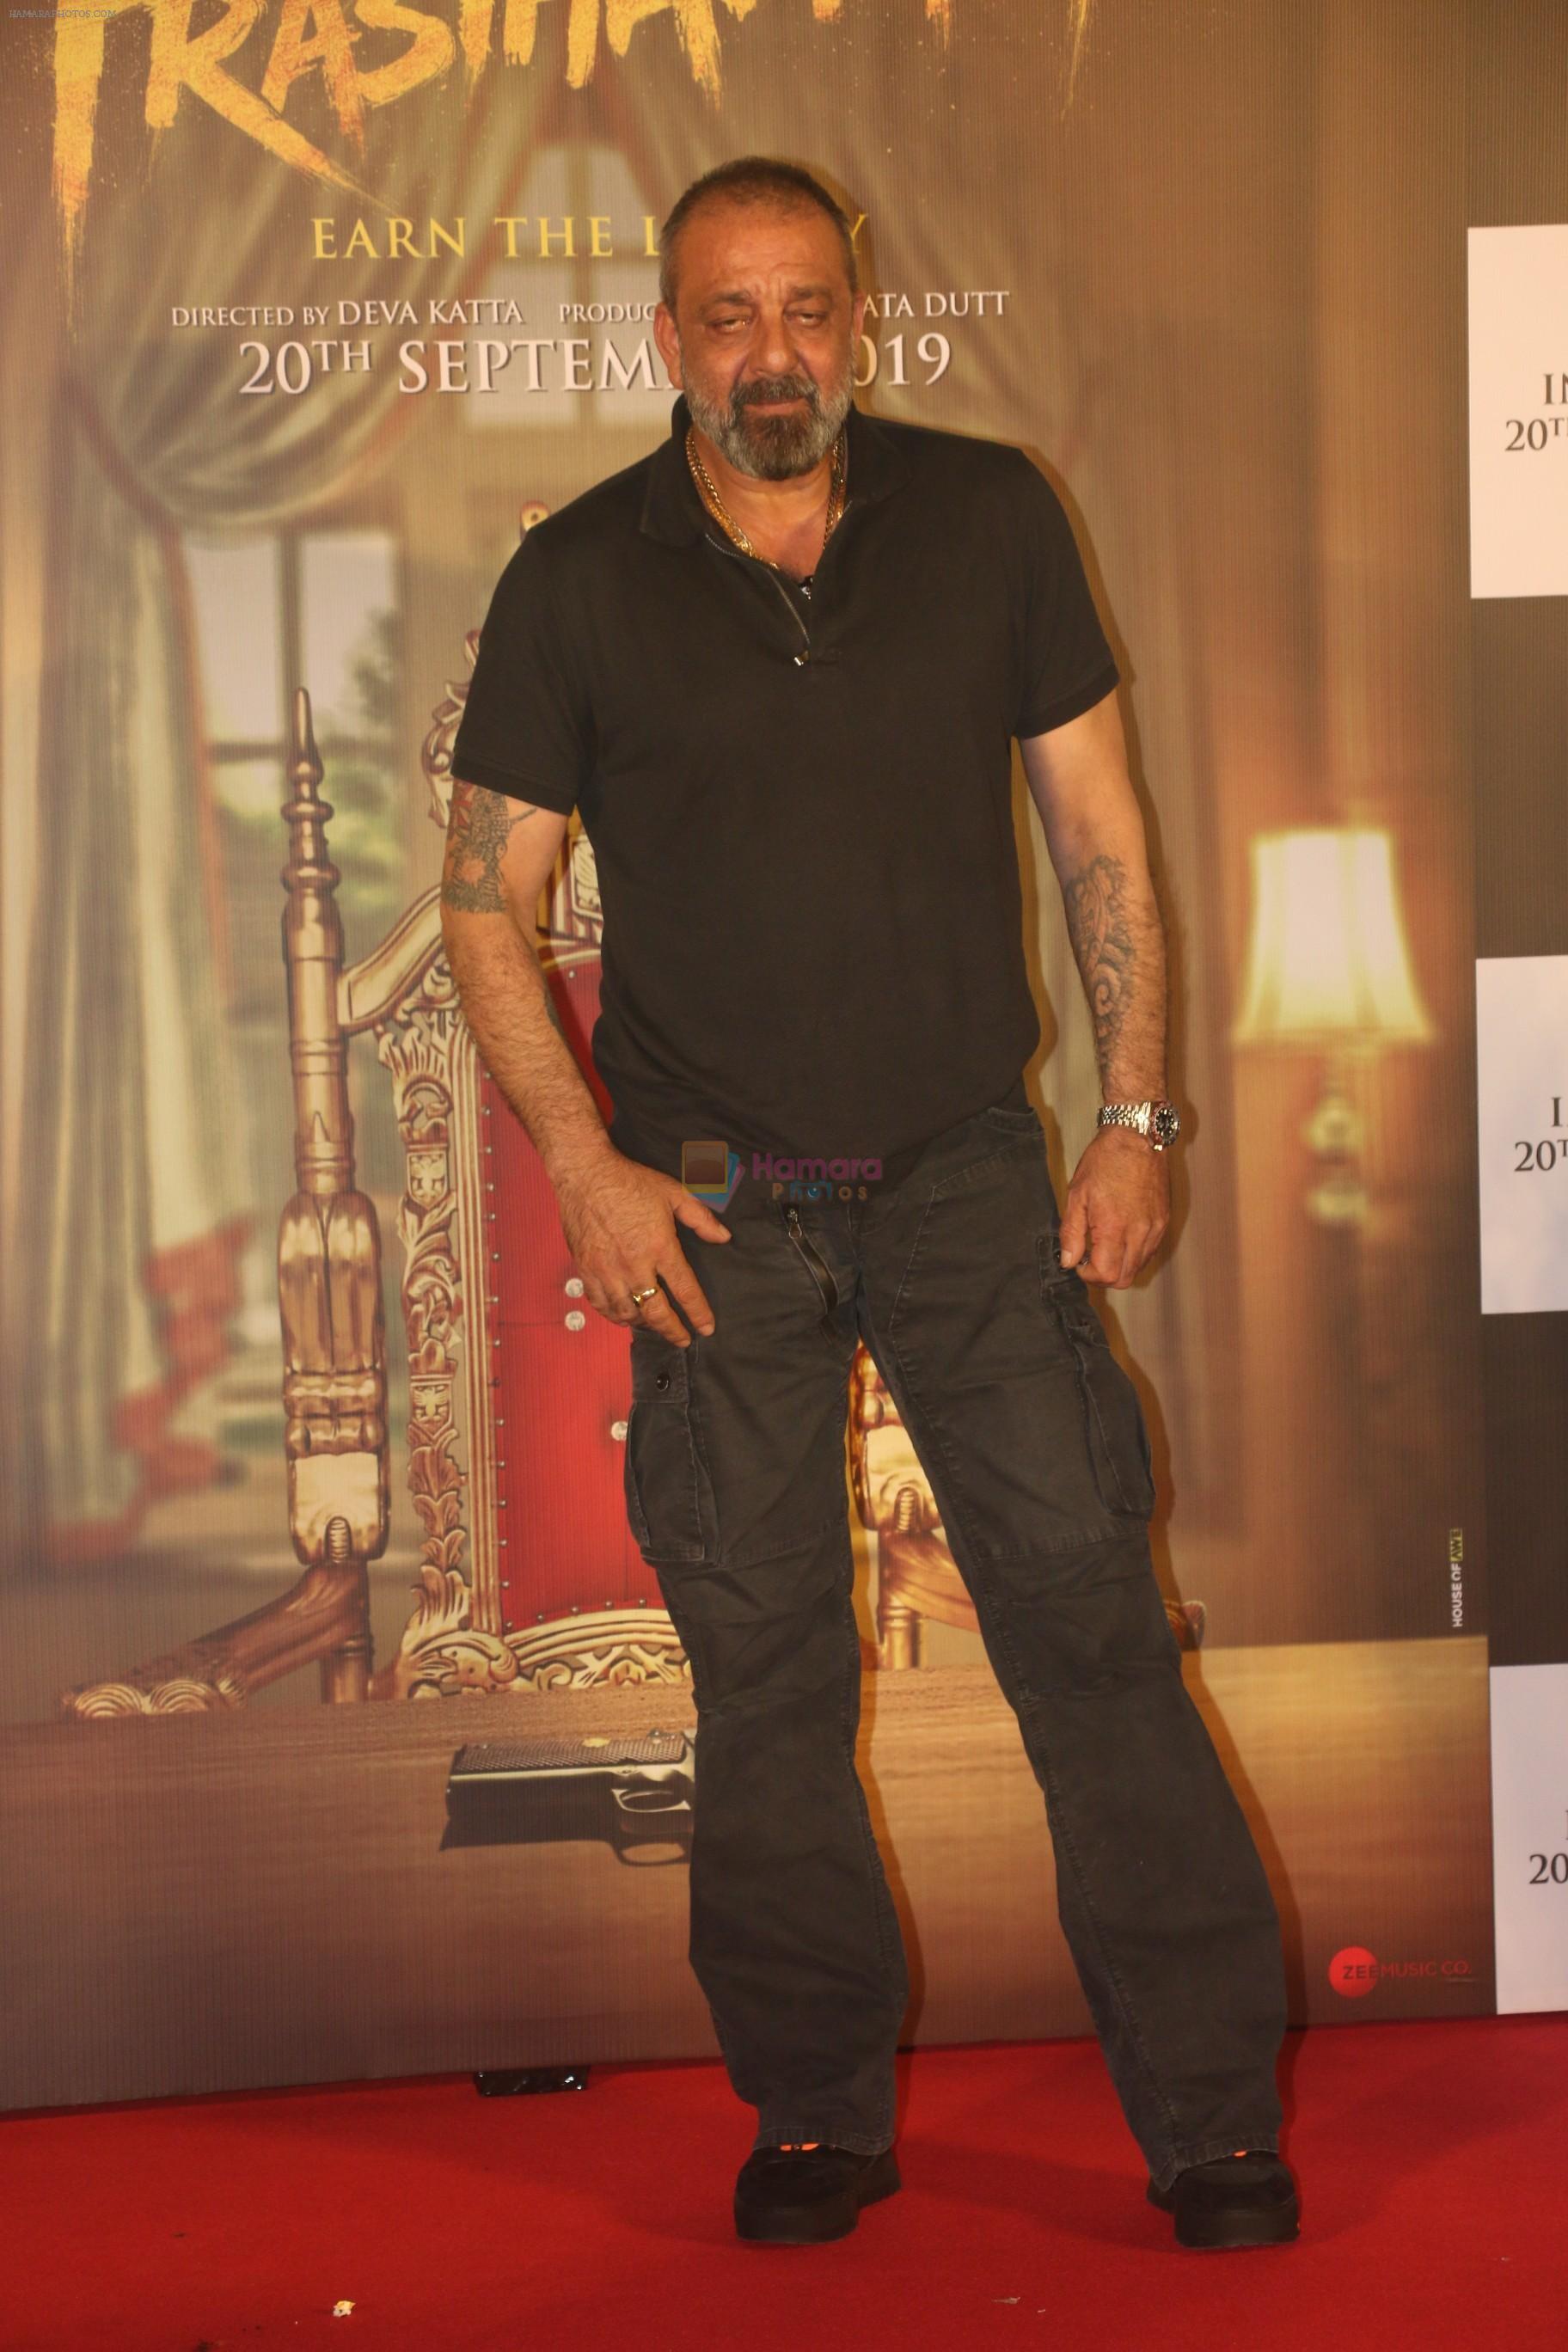 Sanjay Dutt at the Trailer launch of Sanjay Dutt's film Prasthanam in pvr juhu on 29th July 2019